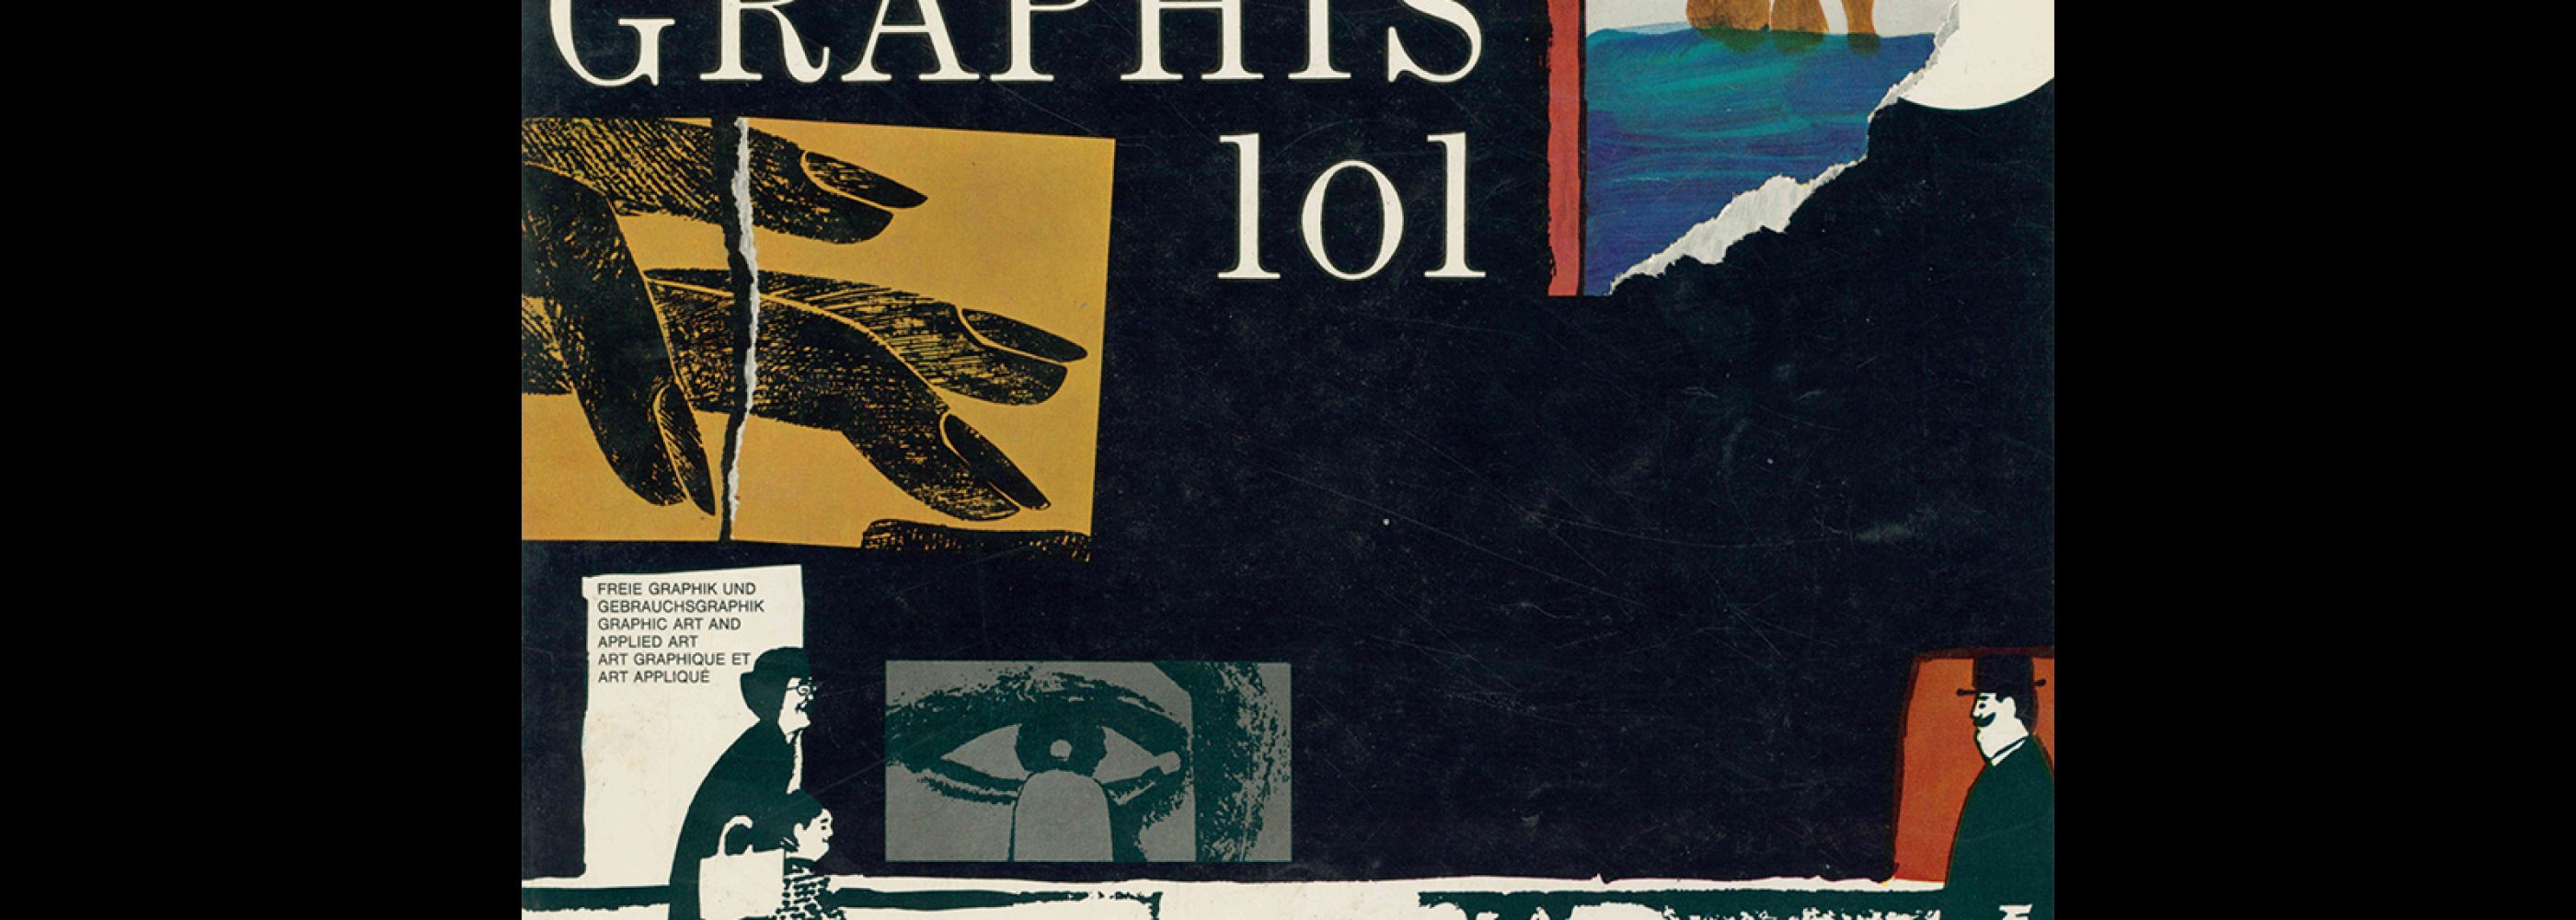 Graphis 101, 1962. Cover design by Felix Müller.